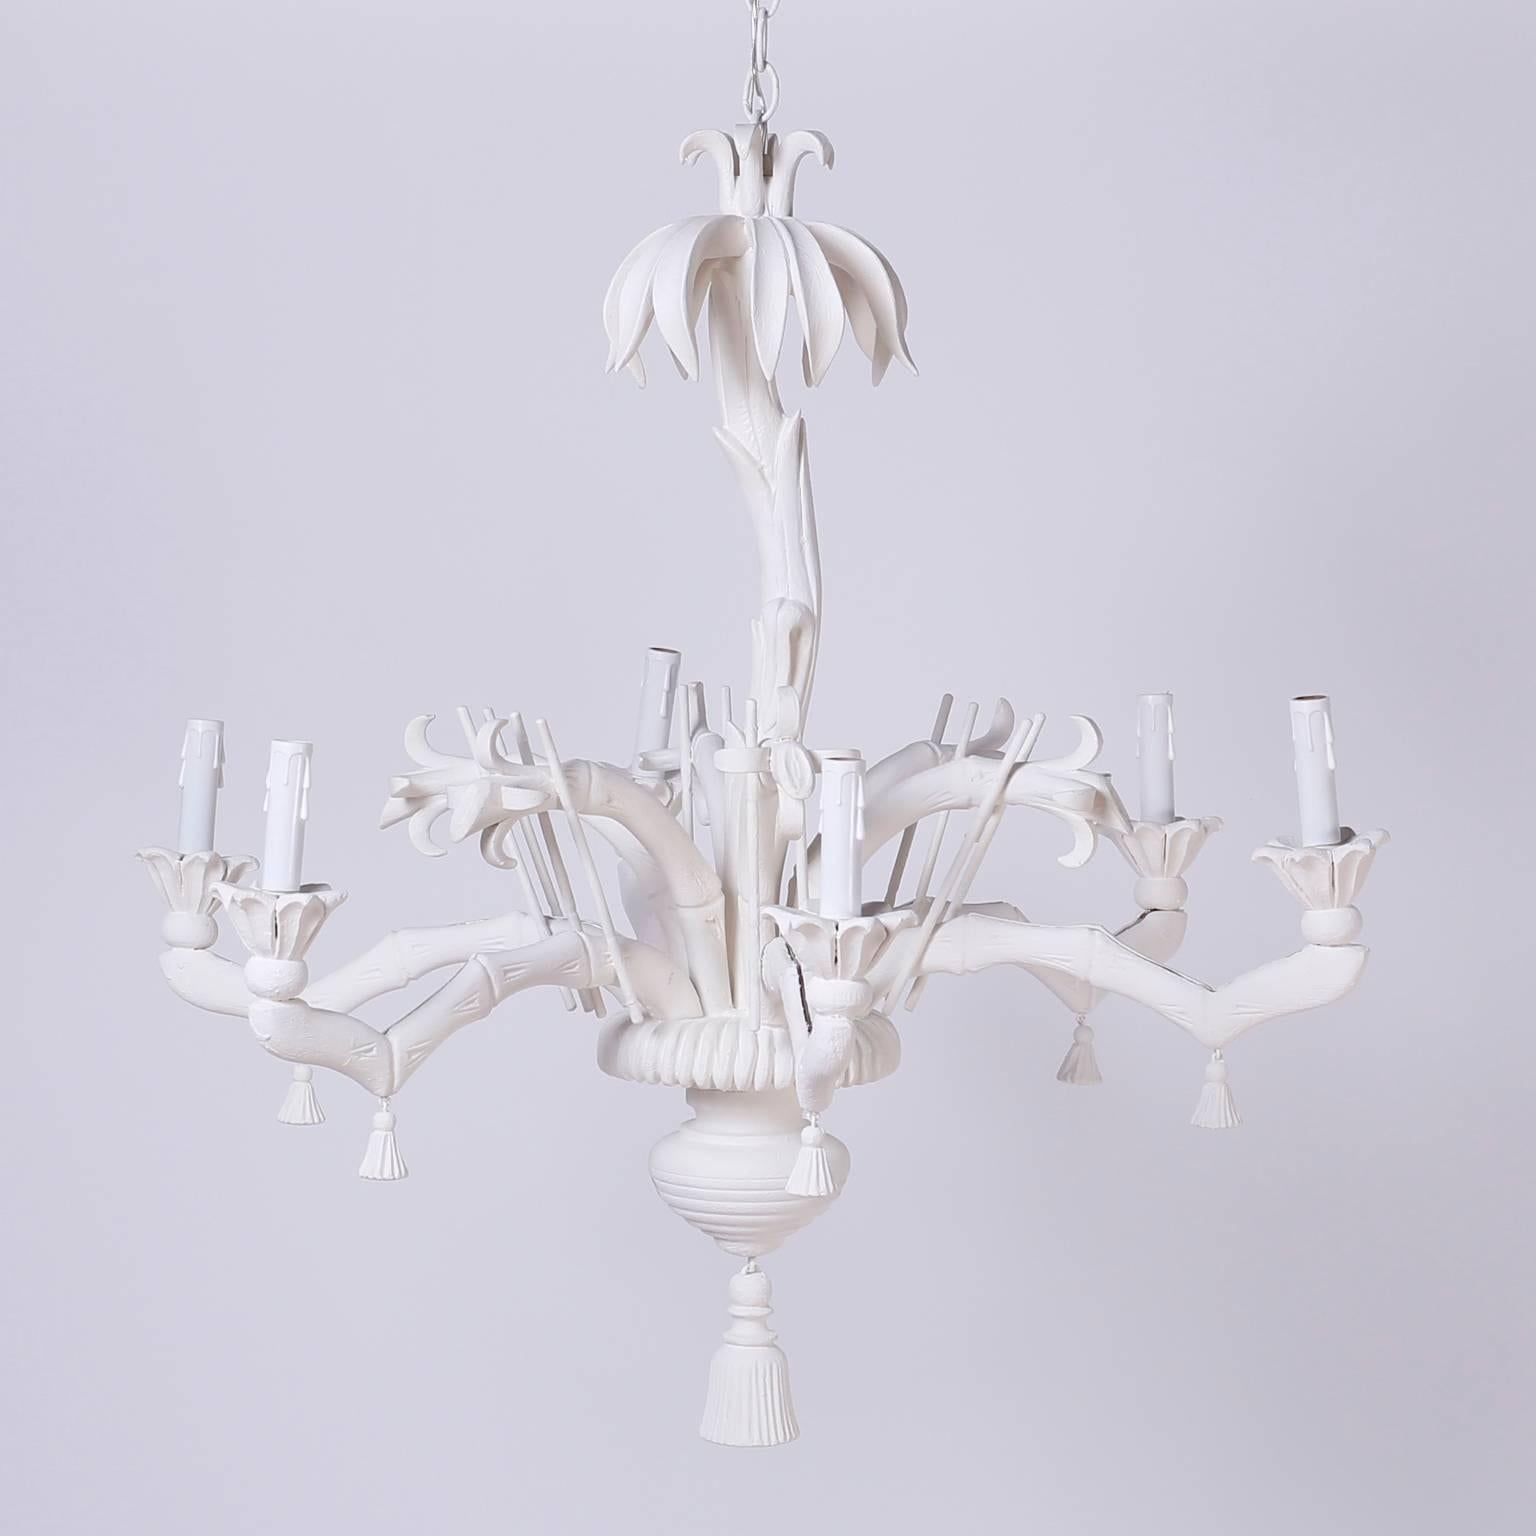 Mid century Italian chandelier with a light hearted whimsical chinoiserie form, constructed with carved wood and white lacquer. Having a palm tree trunk, flowers, stems, and six stylized faux bamboo arms with dangling tassels. This light fixture